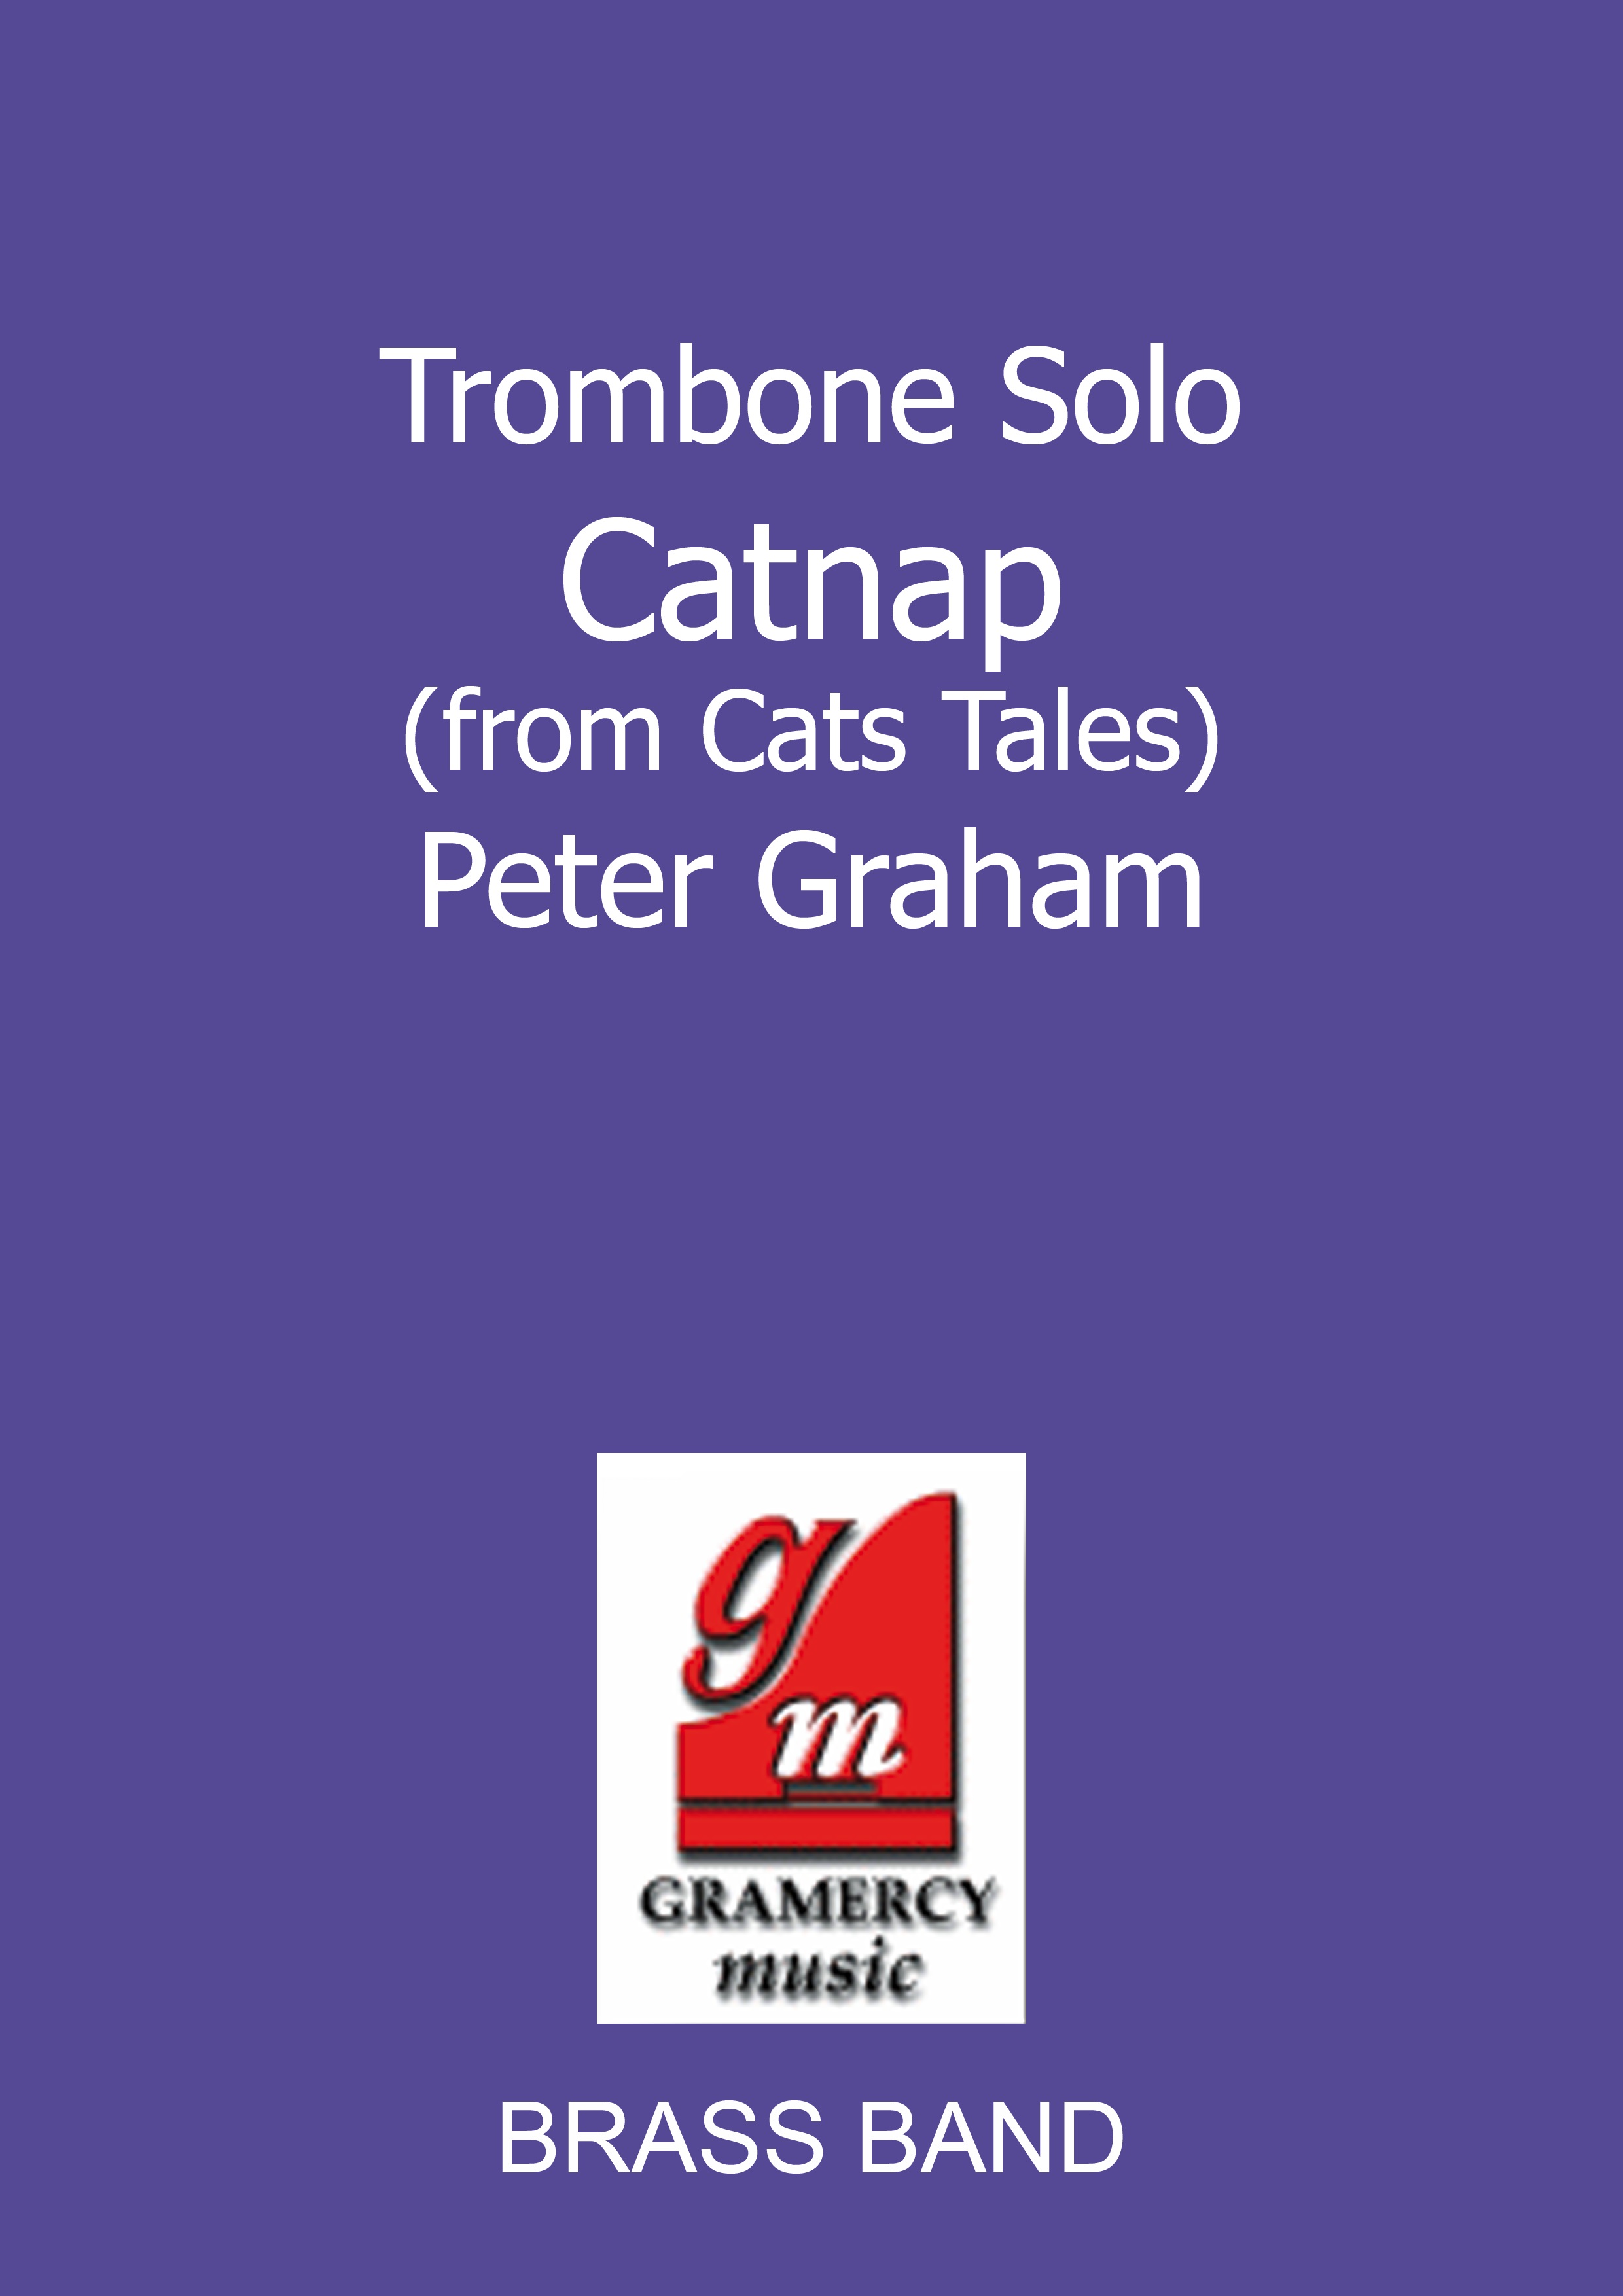 Catnap (from Cats Tales) (Trombone Solo with Brass Band)